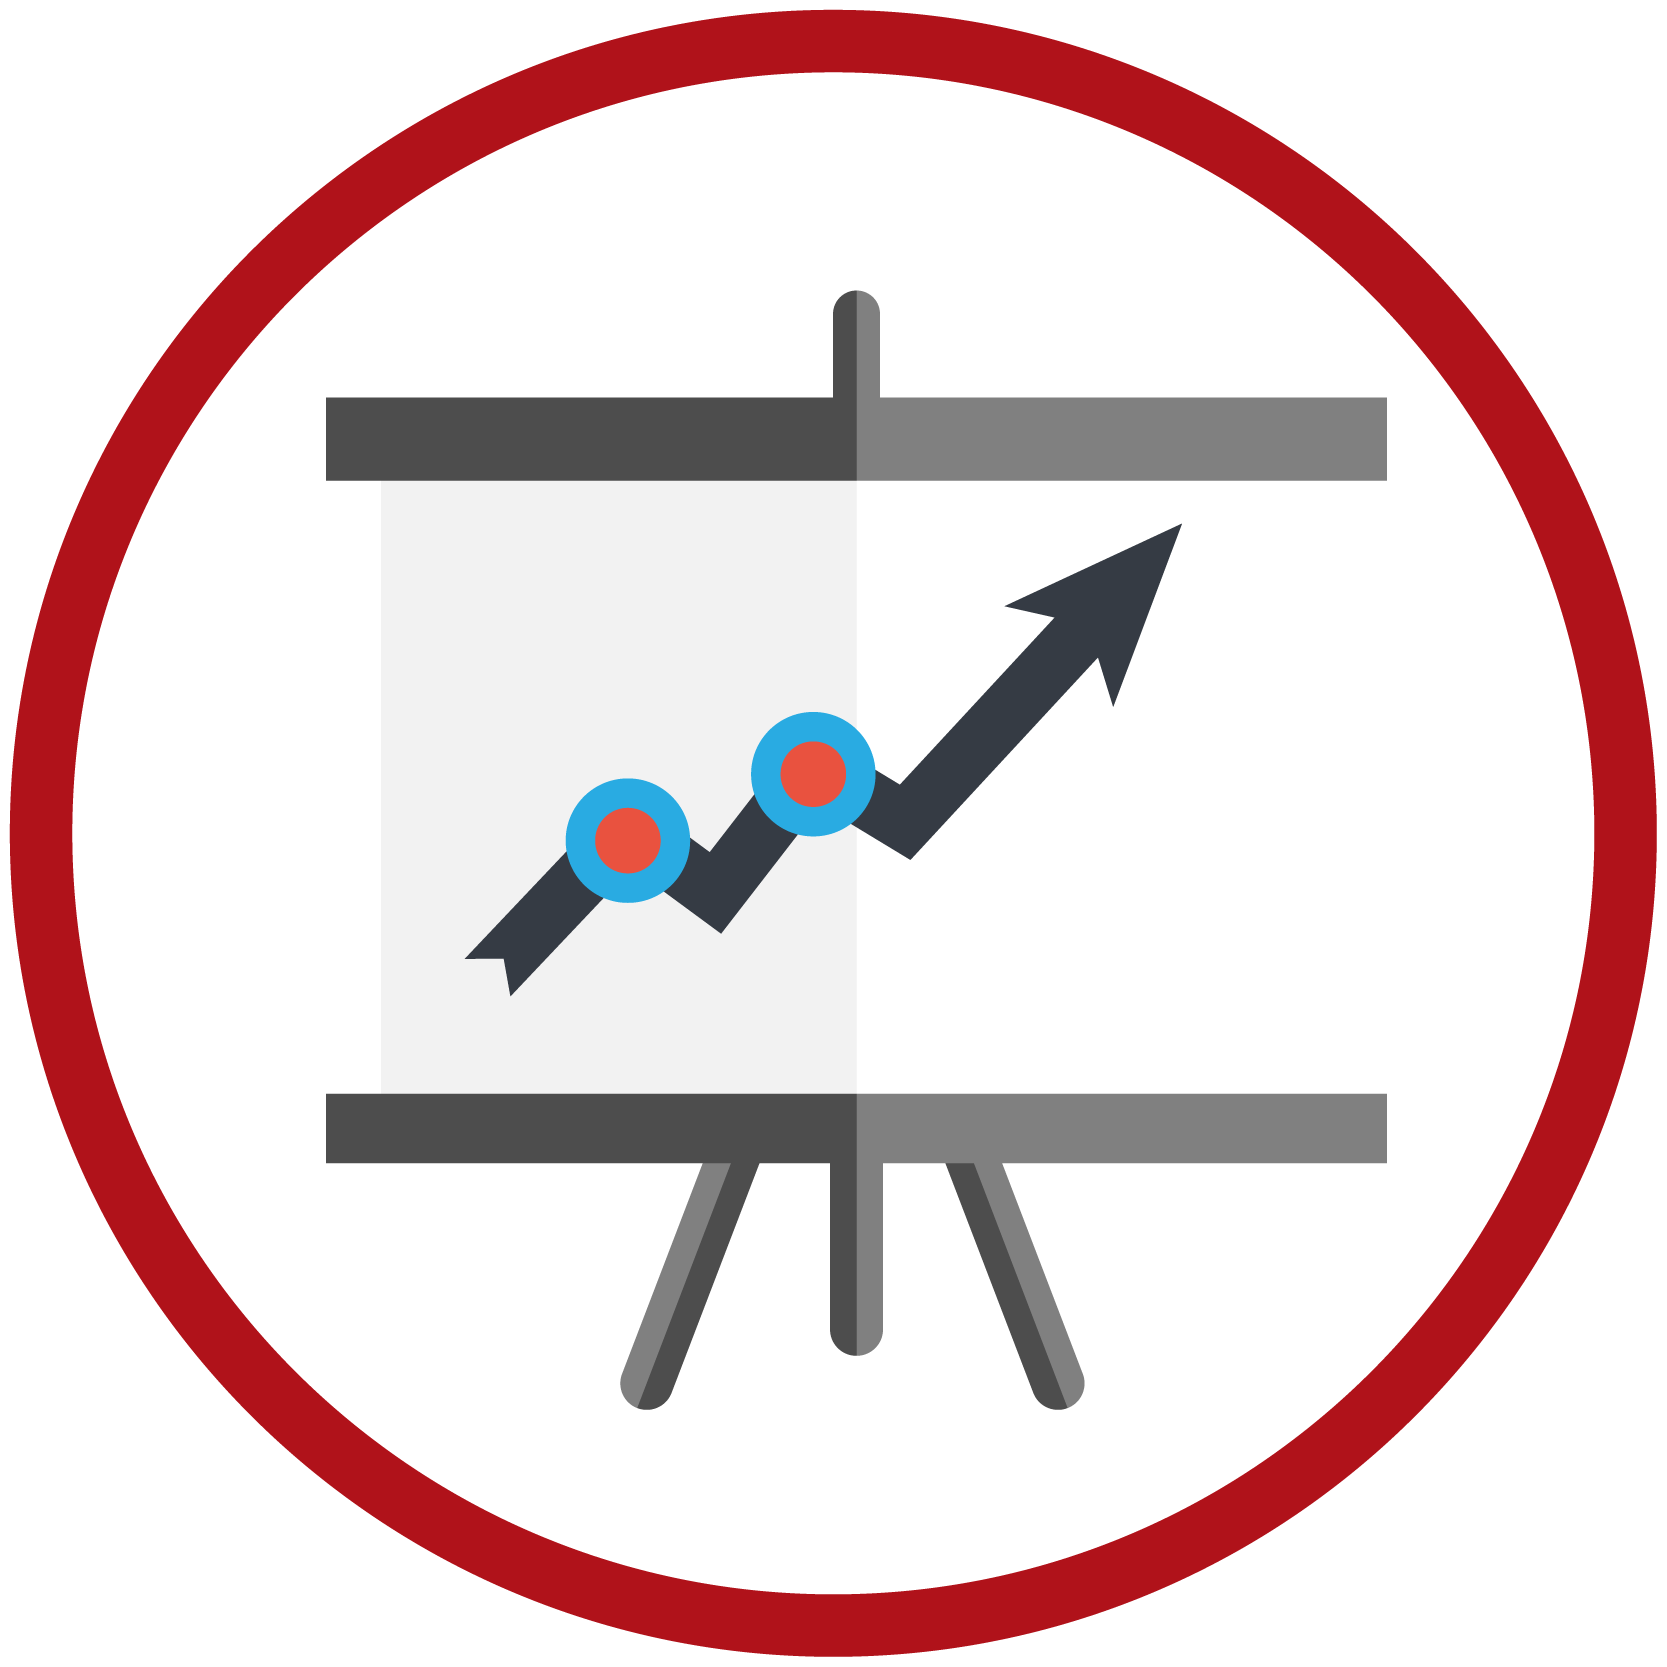 An icon of a presentation showing company growth